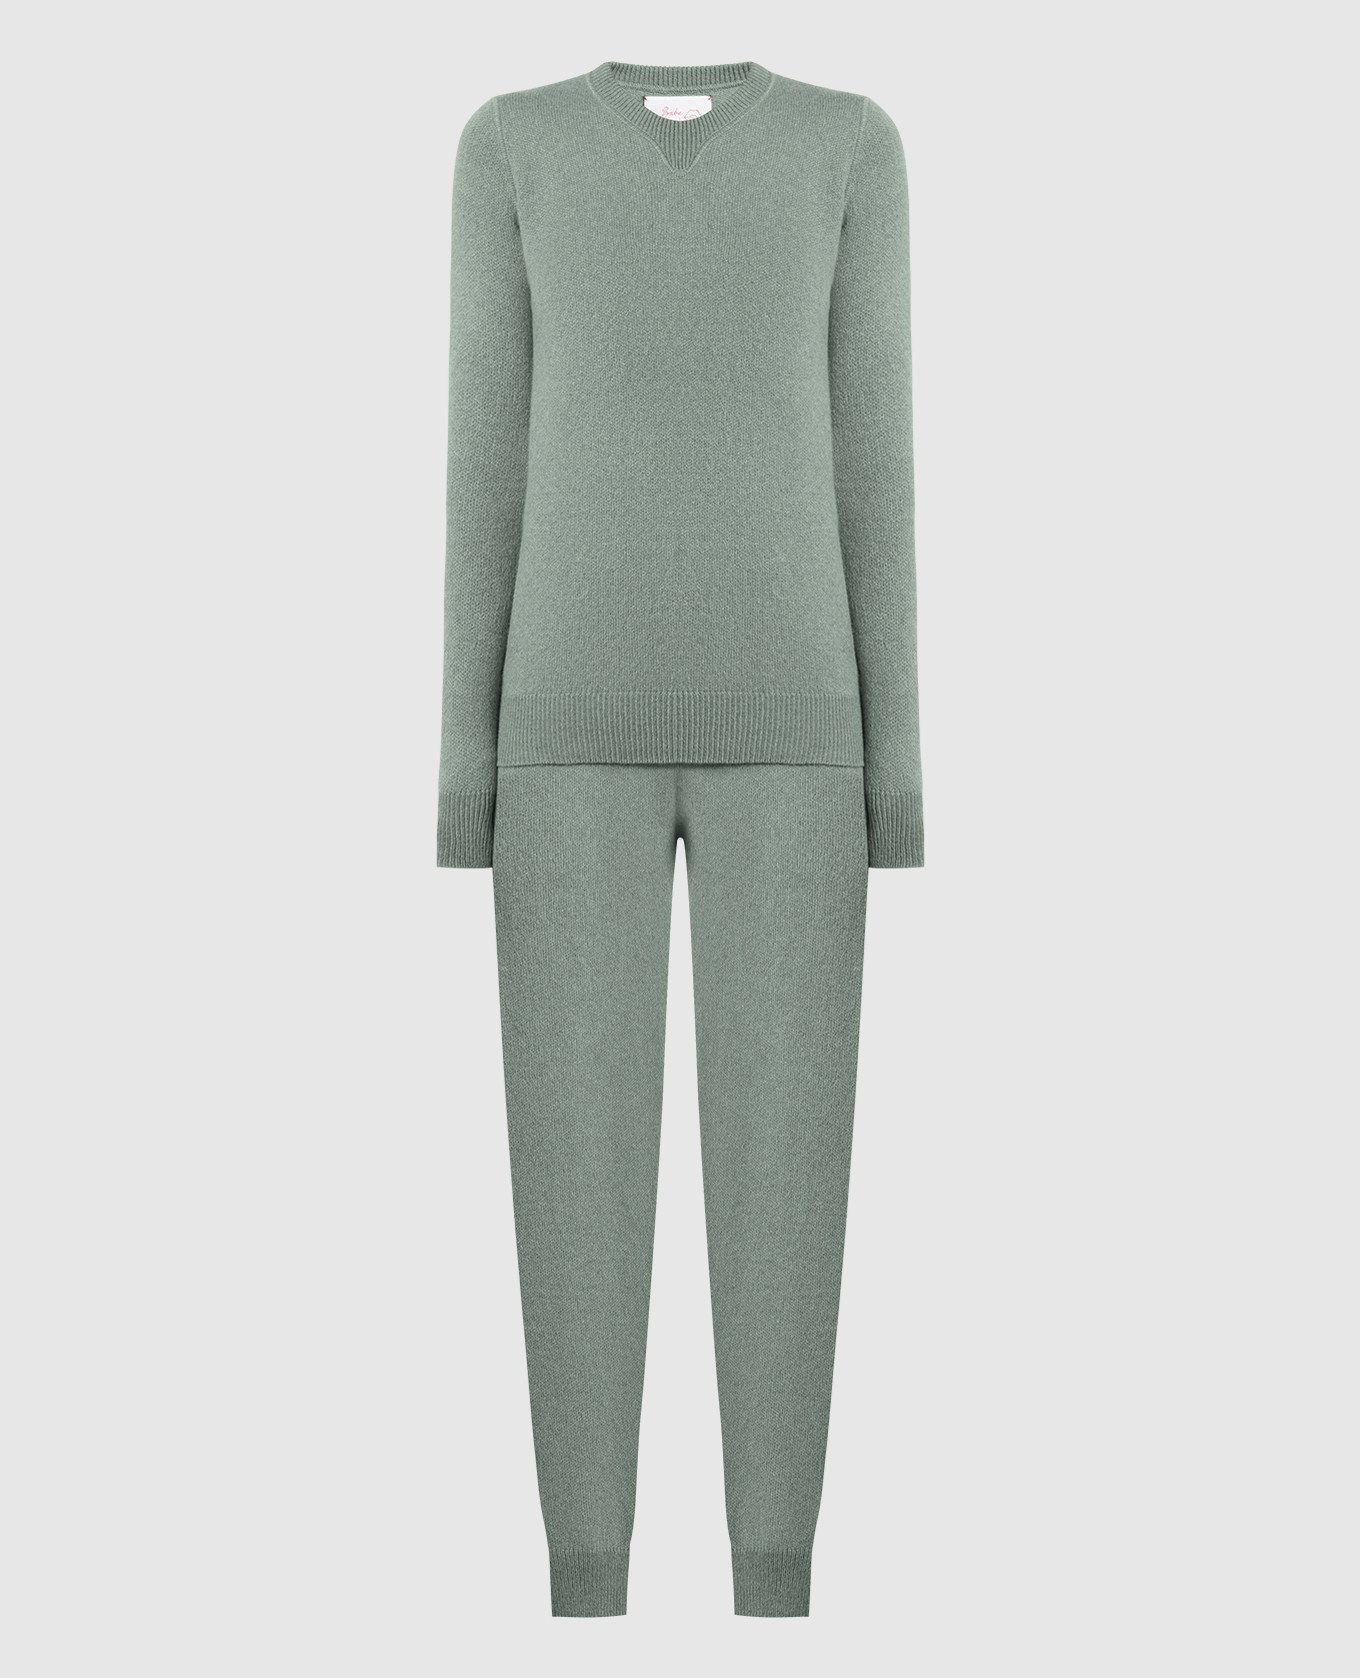 Green cashmere jumper and joggers suit